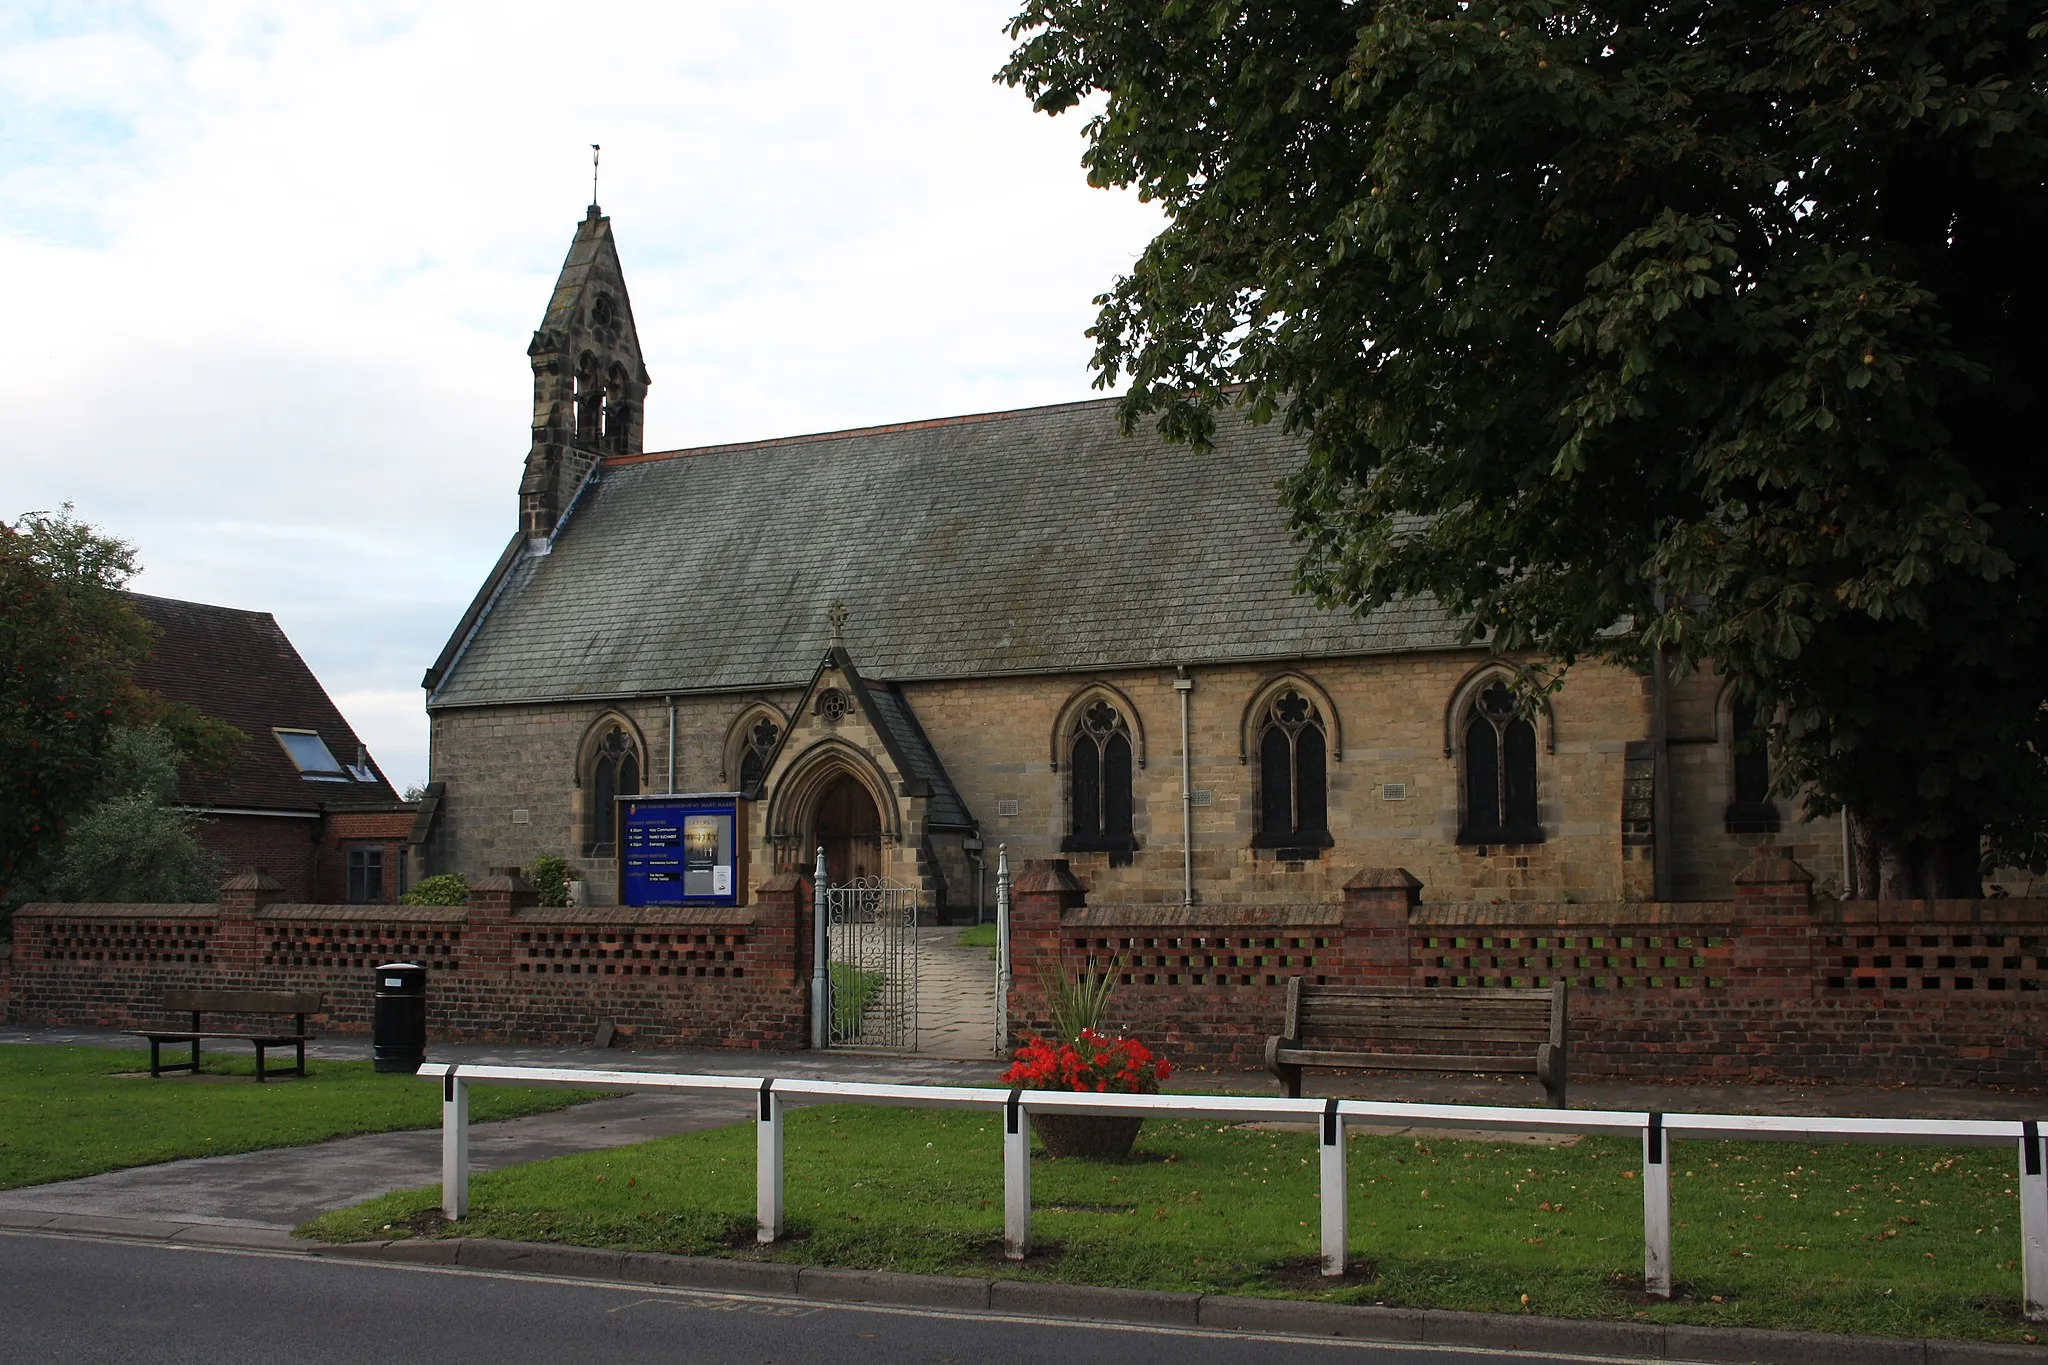 Image of Haxby